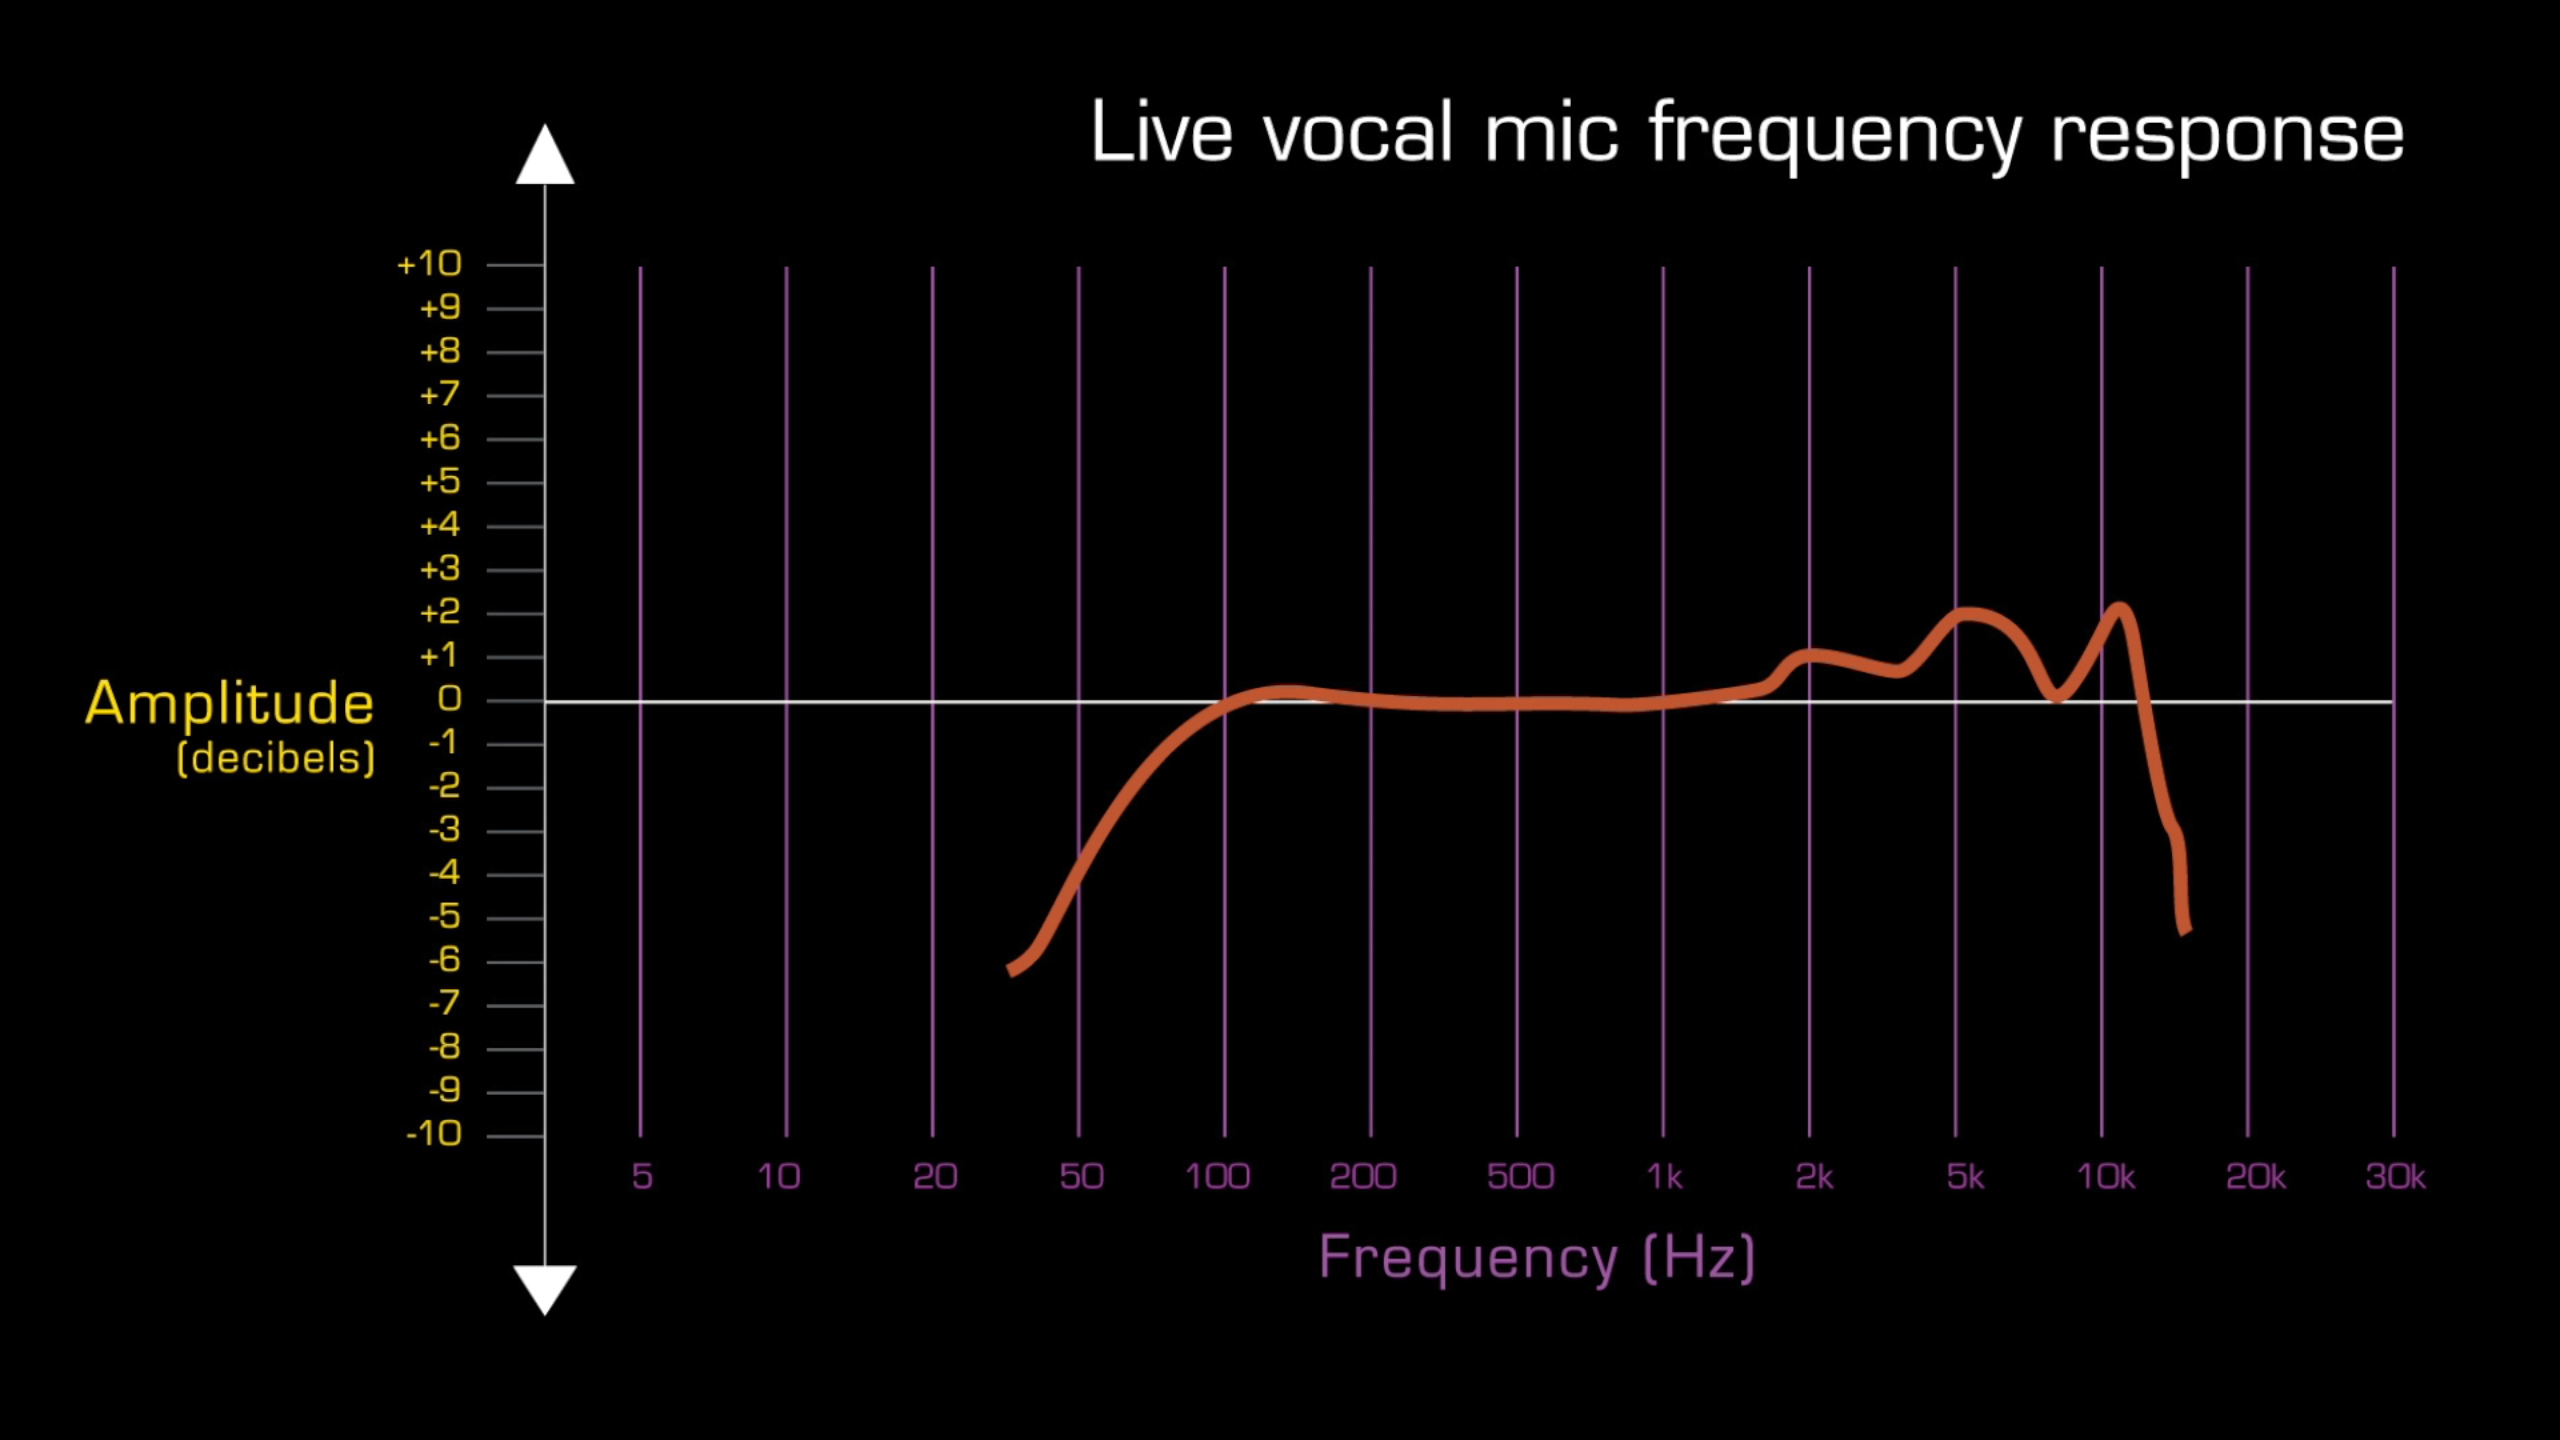 Vocal mic frequency response diagram